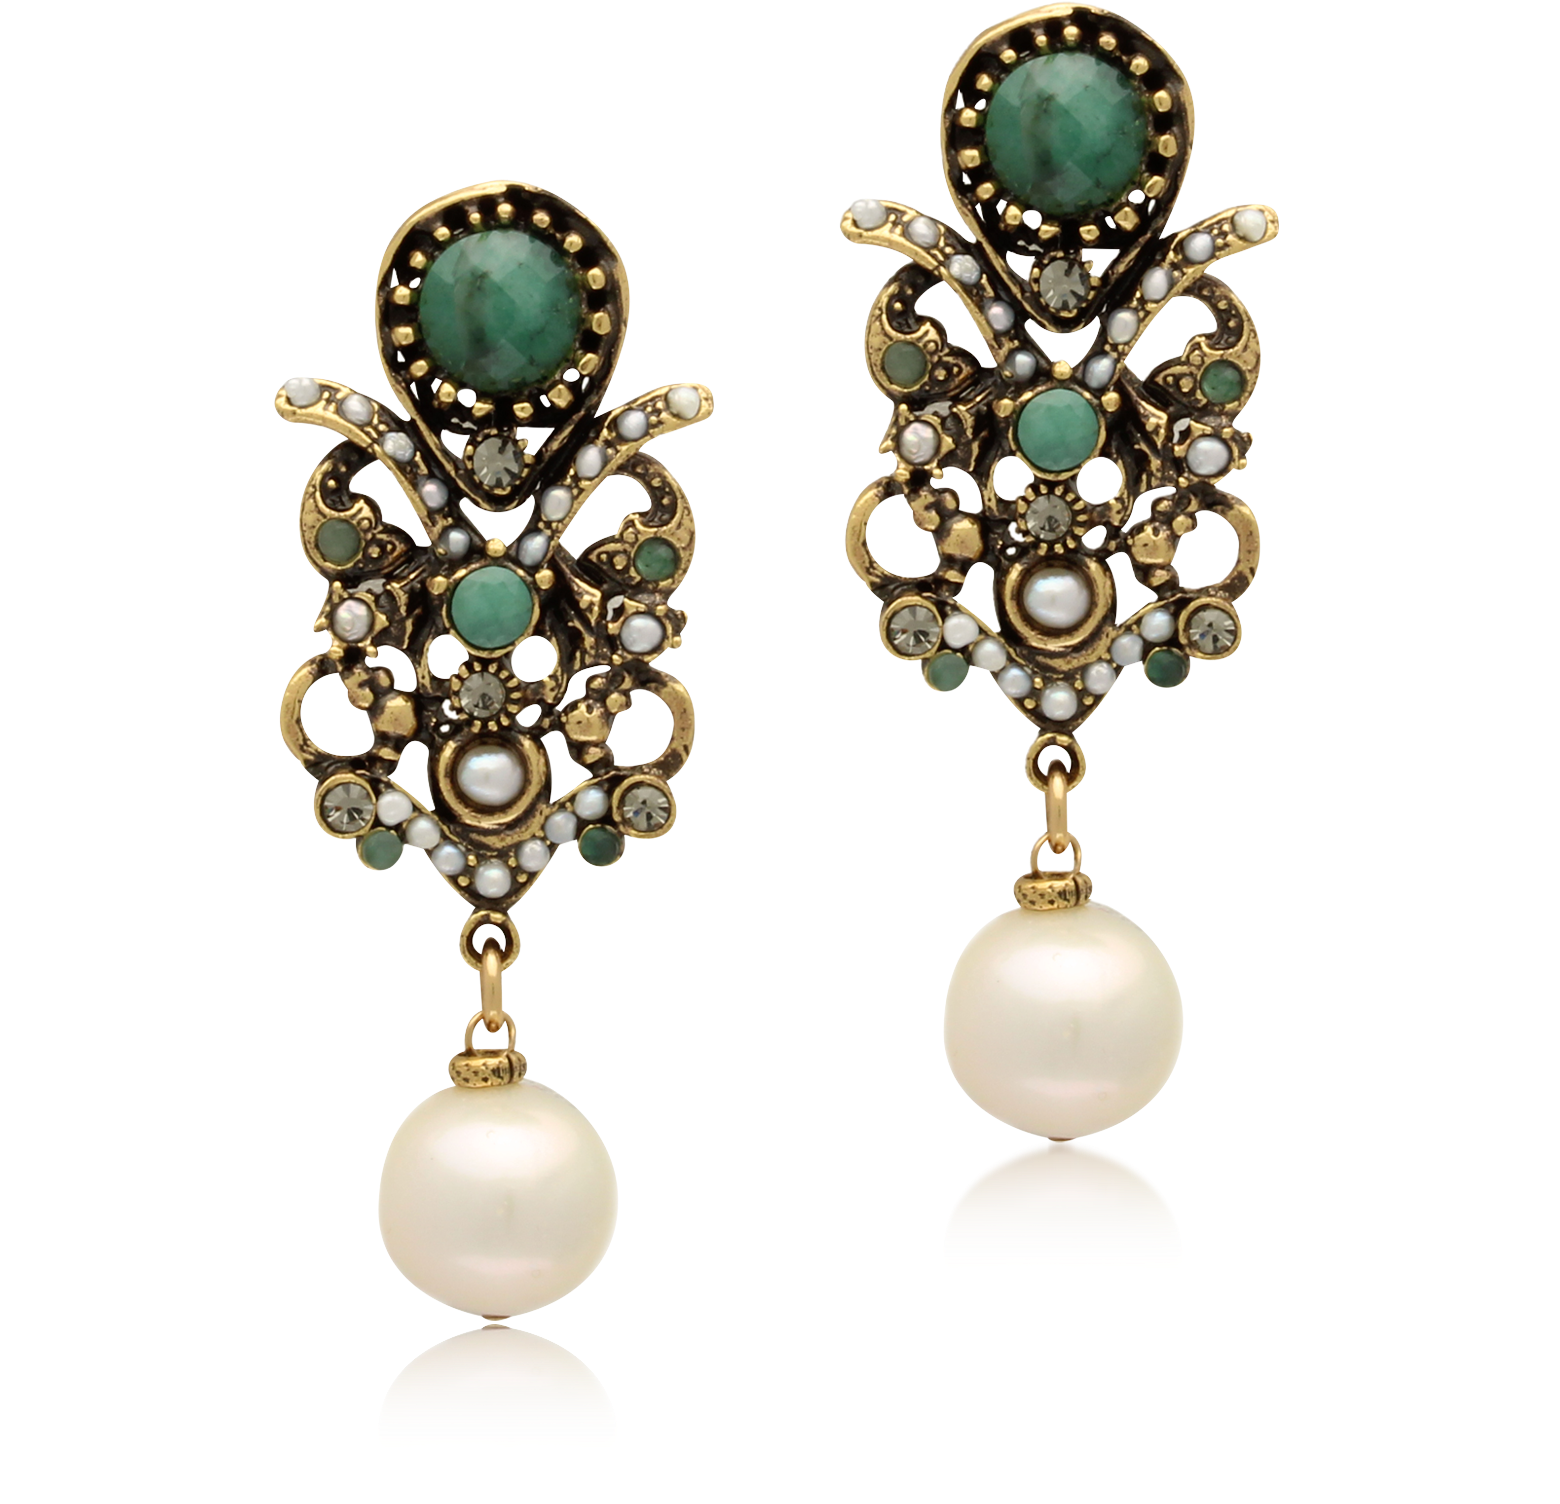 Alcozer & J Golden Brass, Glass Pearl and Emerald Earrings at FORZIERI